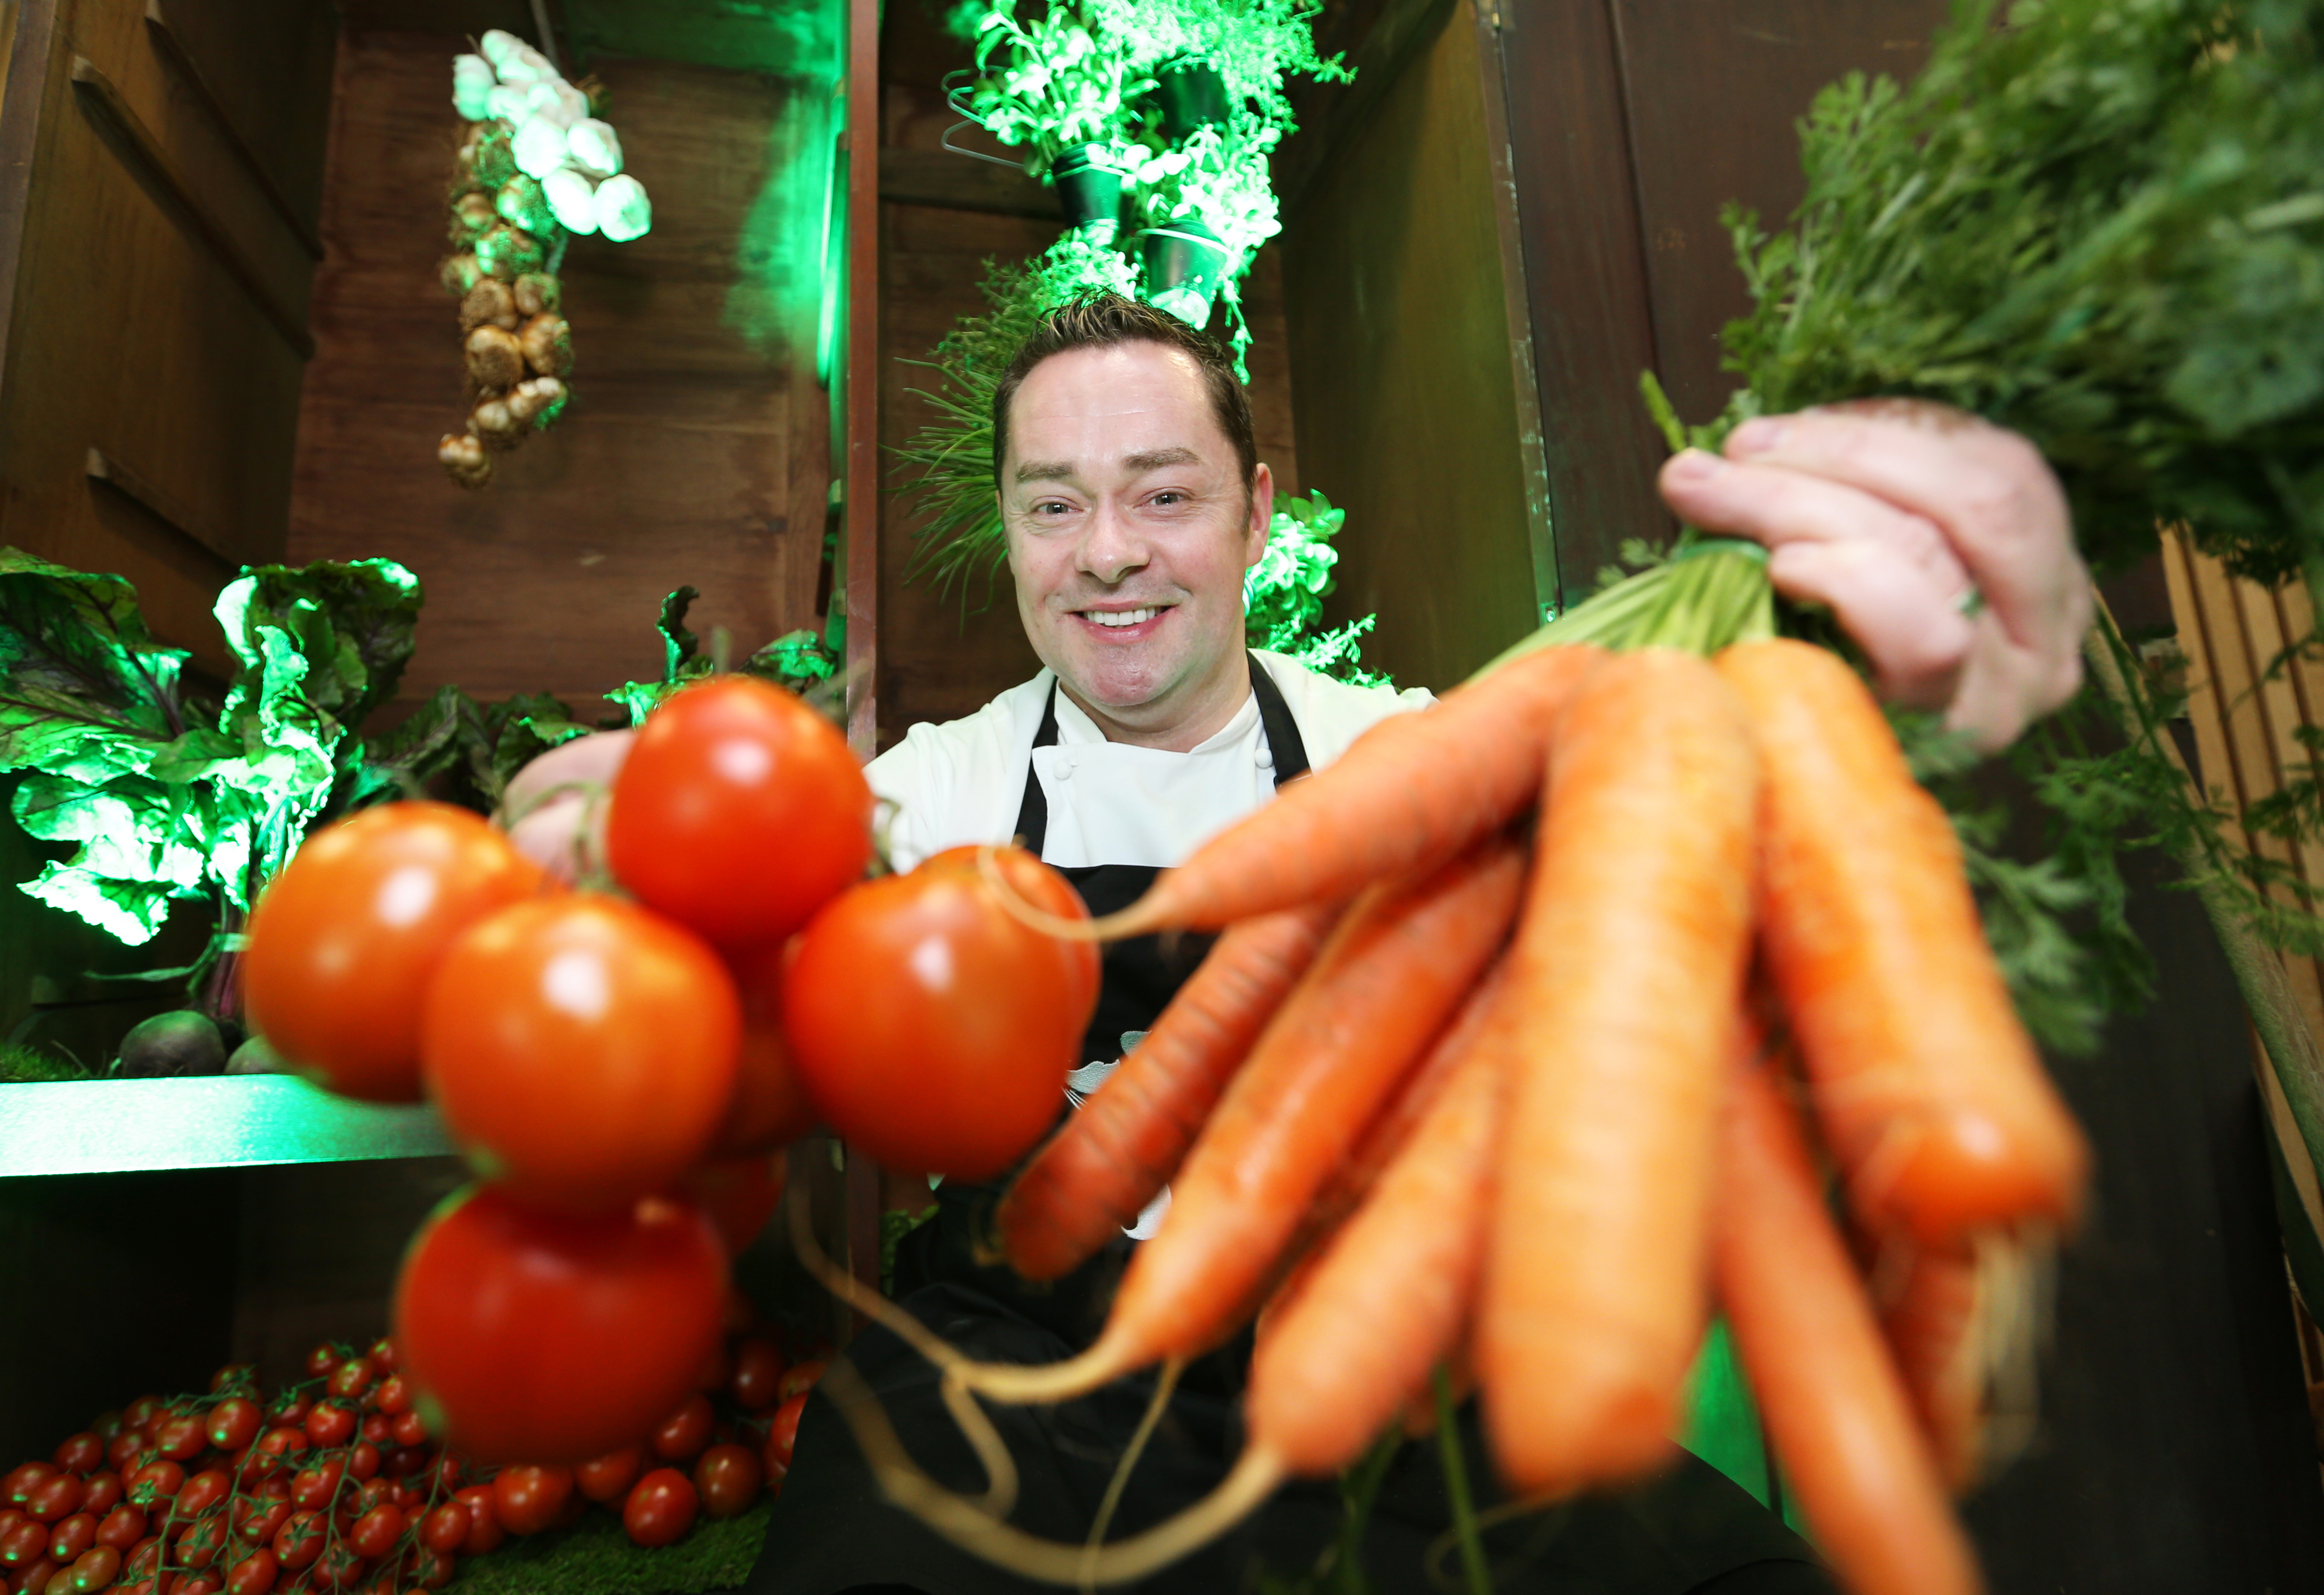 TV chef Neven Maguire is working with the Compass Group to promote the importance of locally sourced produce and using Irish suppliers as well as developing the Group's hospitality offering at the Aviva Stadium